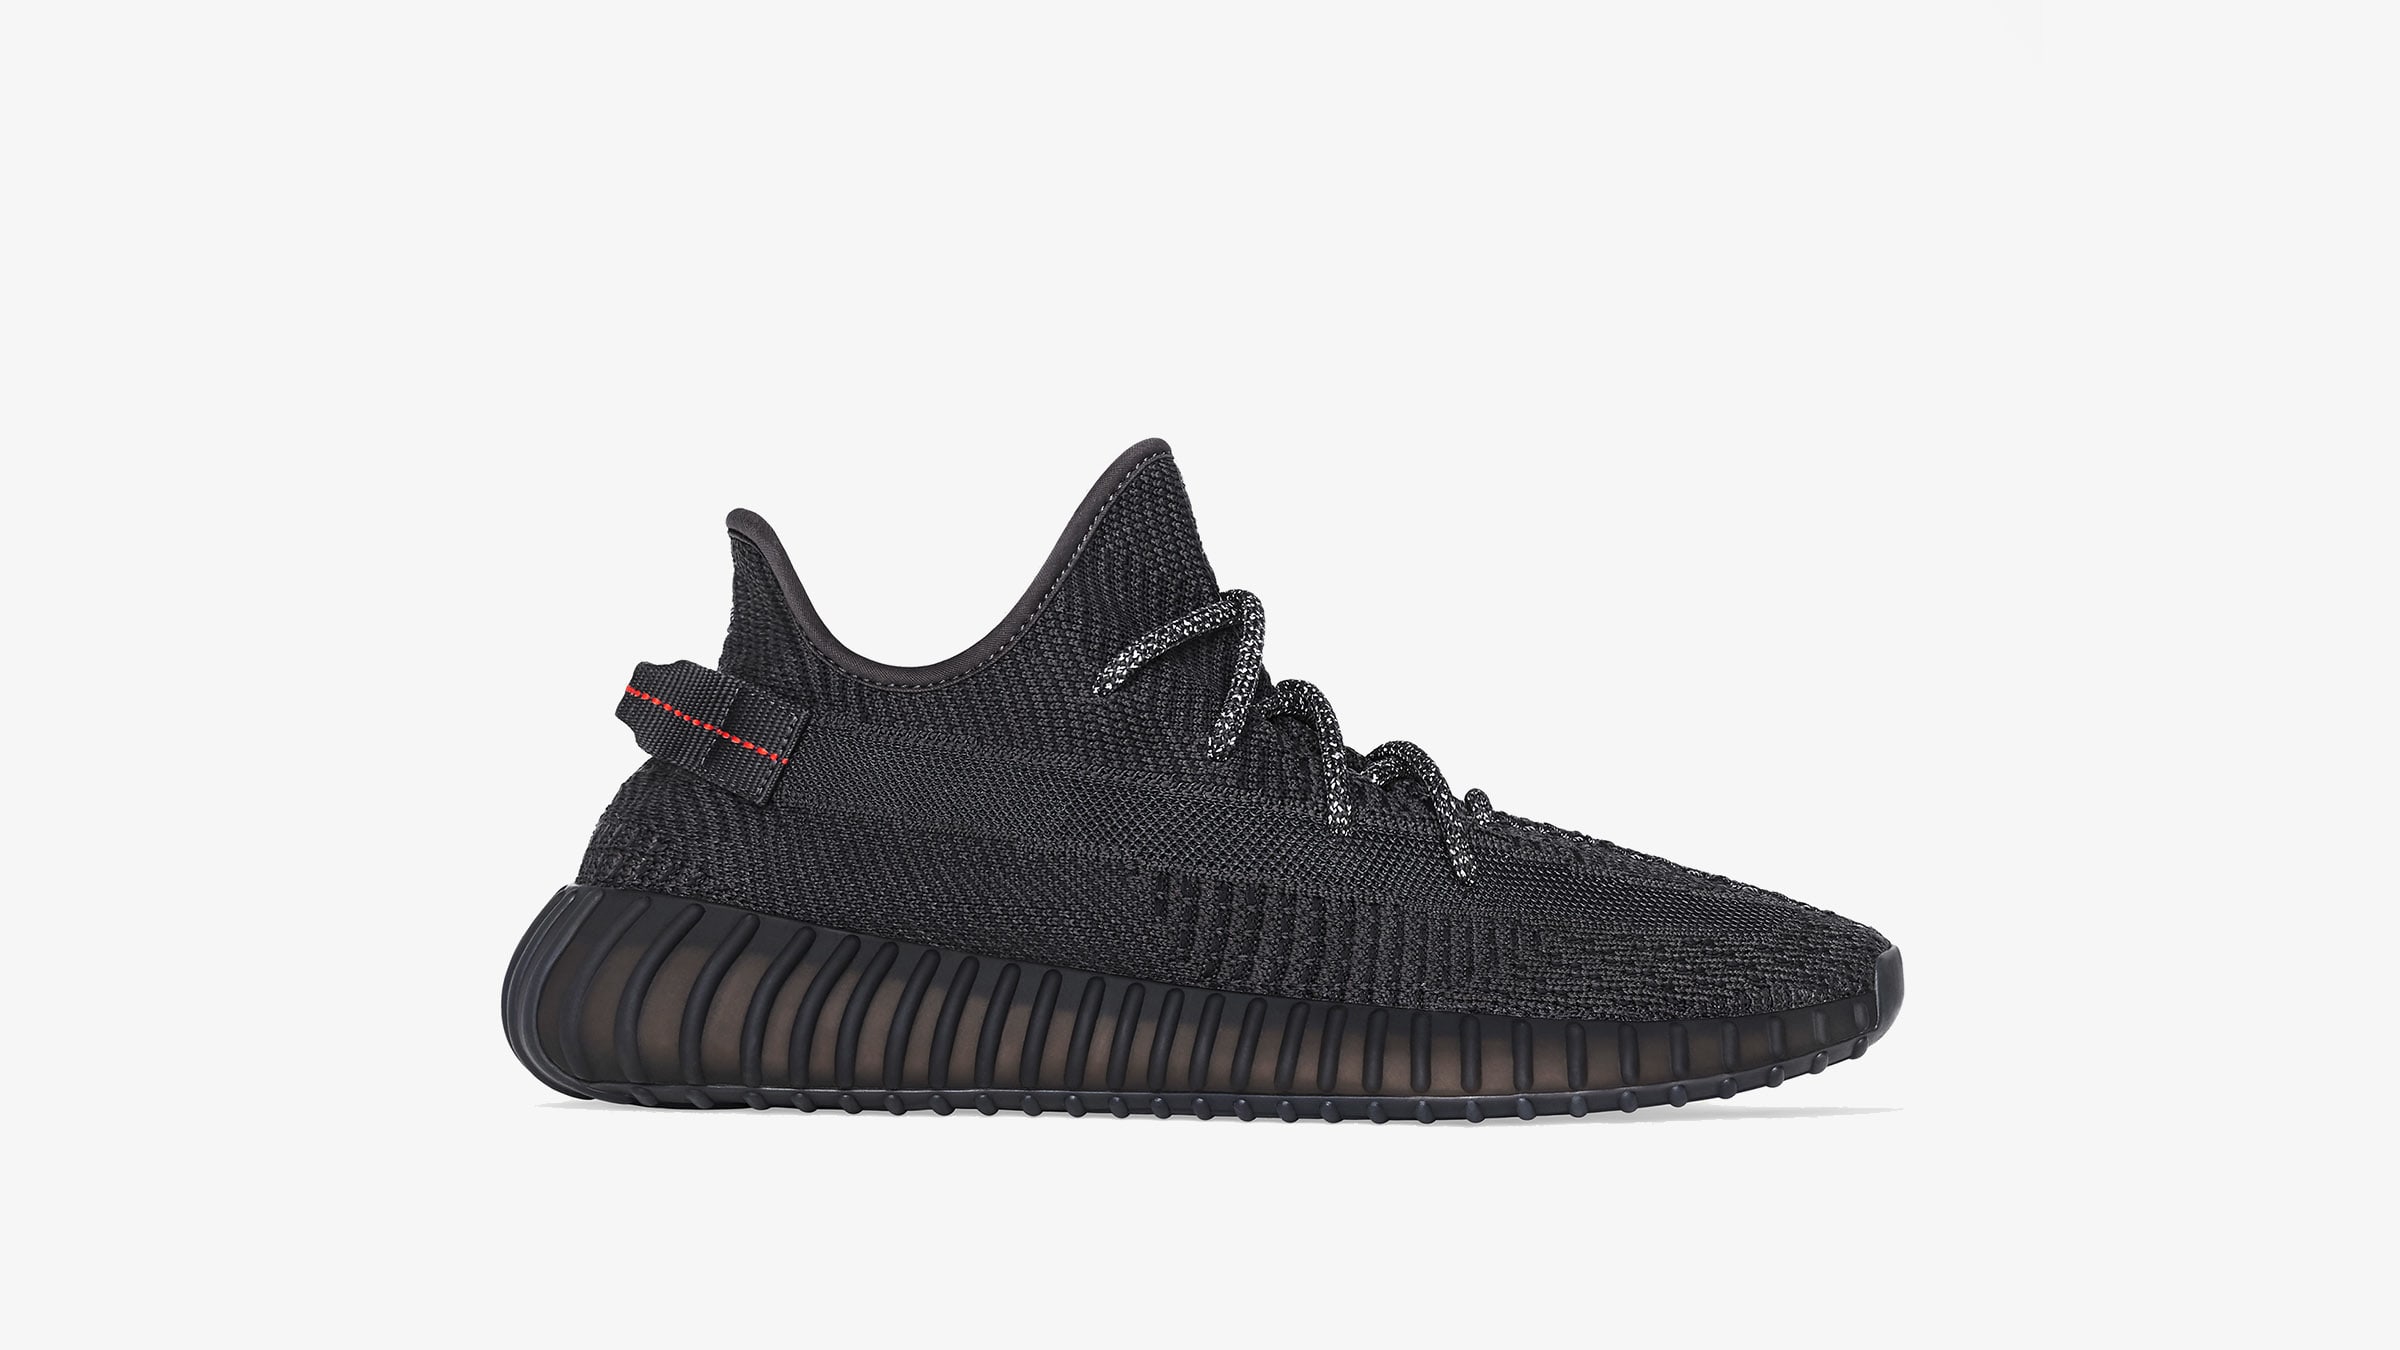 Yeezy Boost 350 V2 (Black) | END. Launches